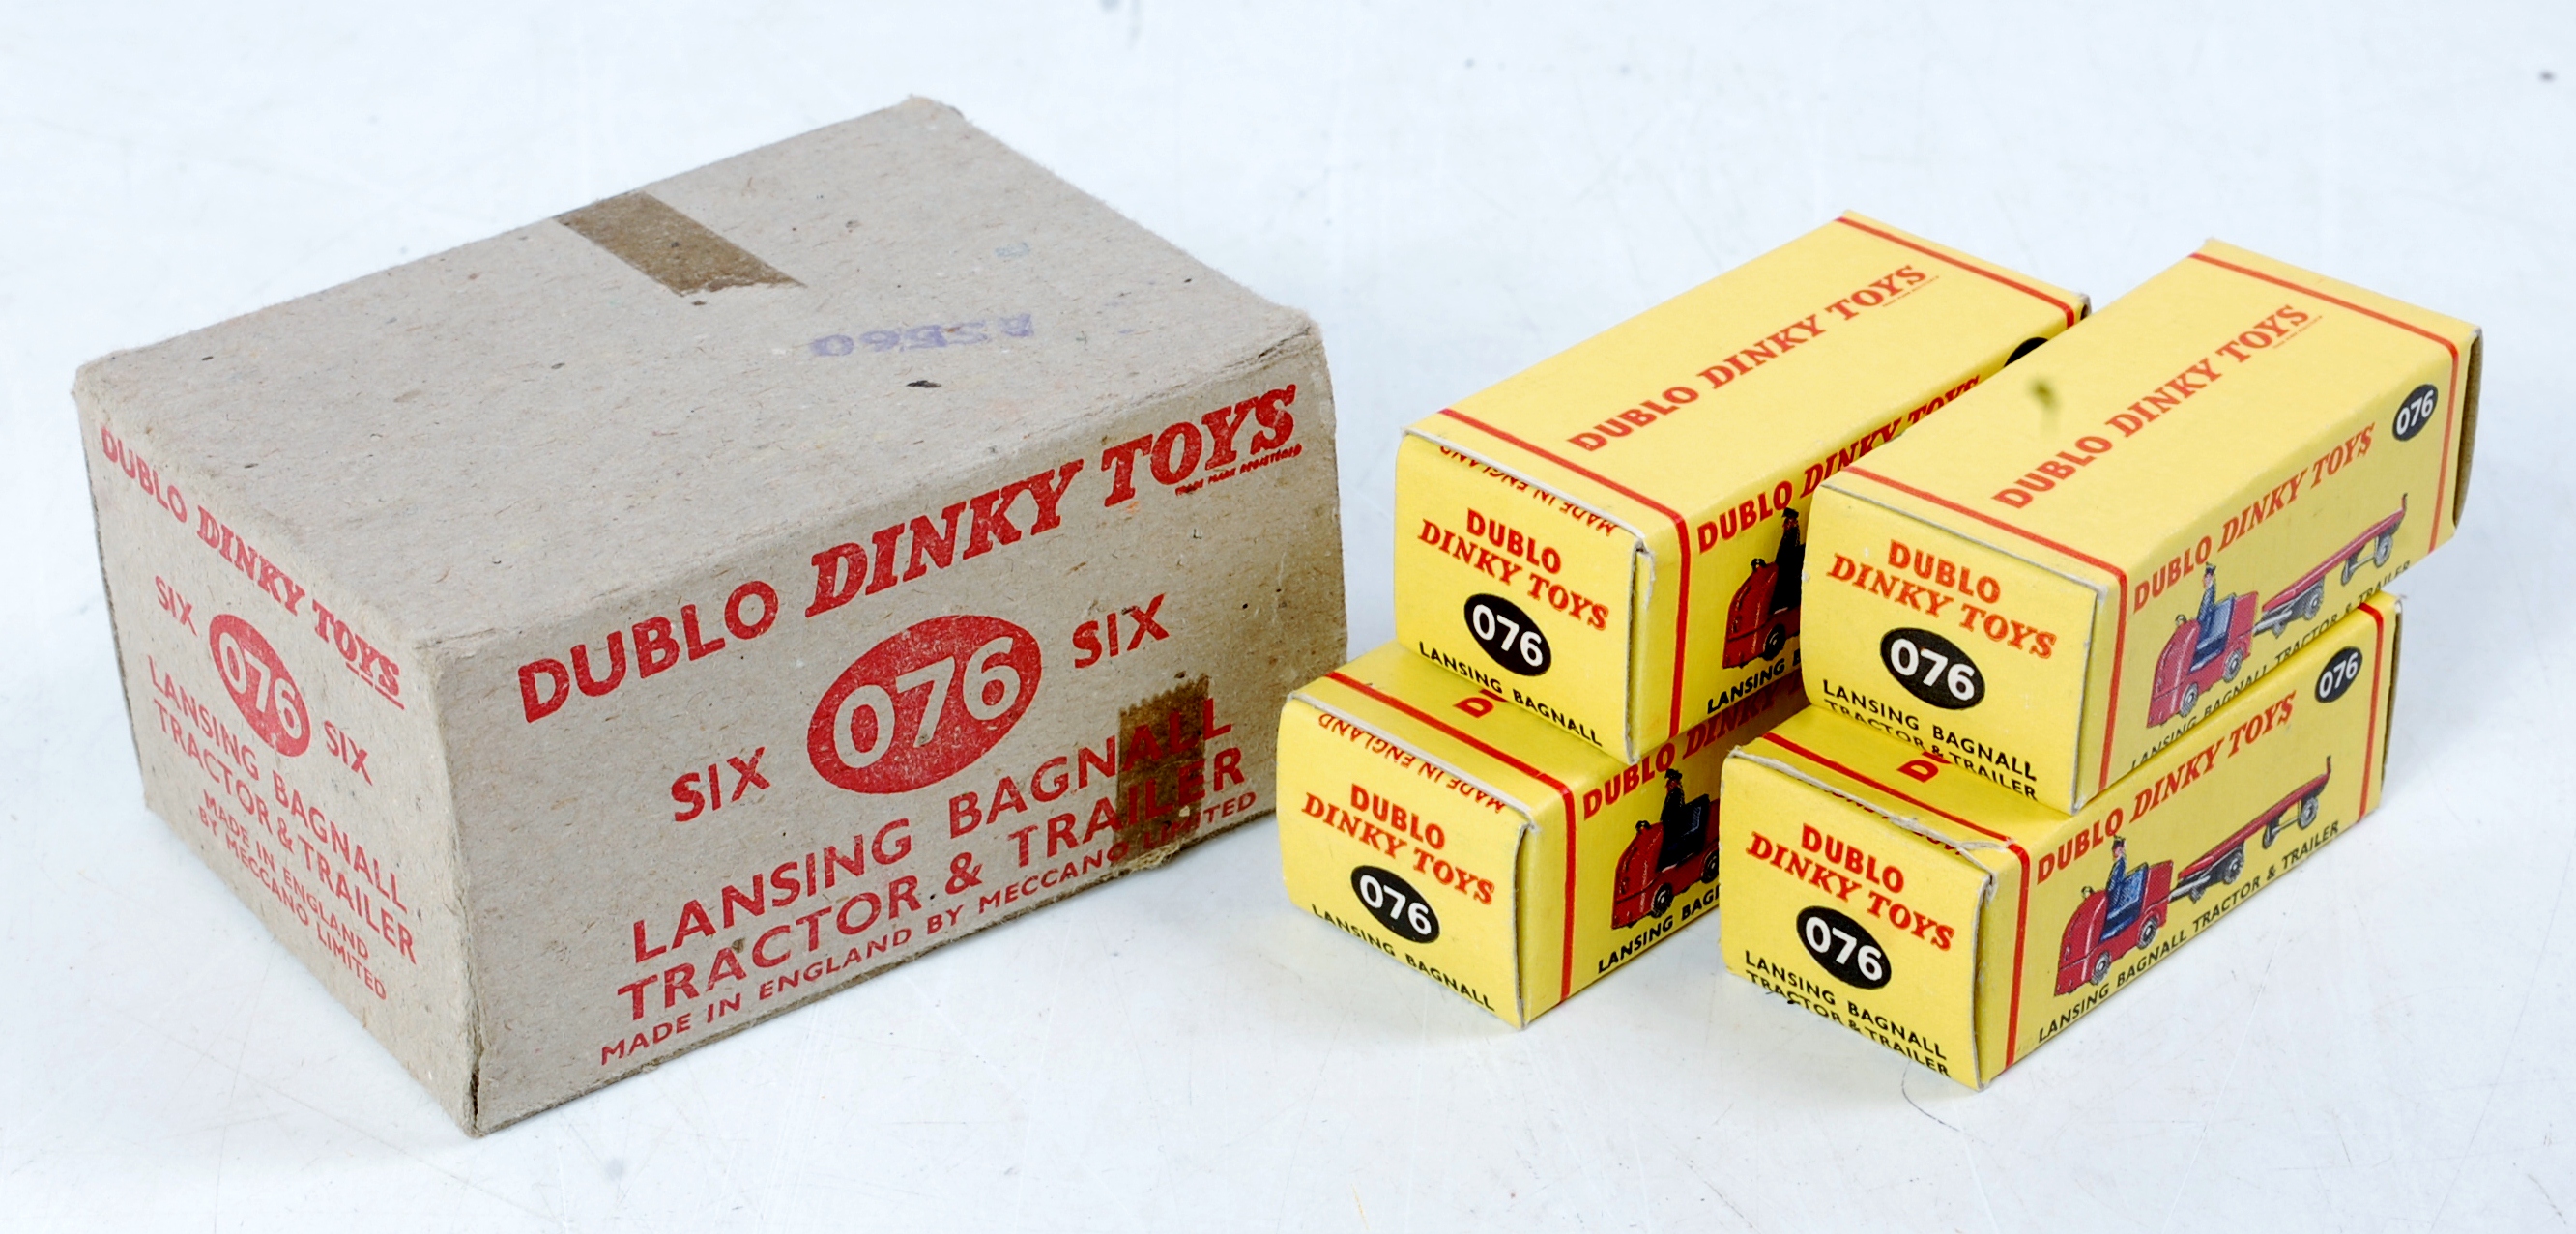 Trade box of six 076 Lansing Bagnall Tractors and Trailers (BG-VG) But containing only 4 boxes